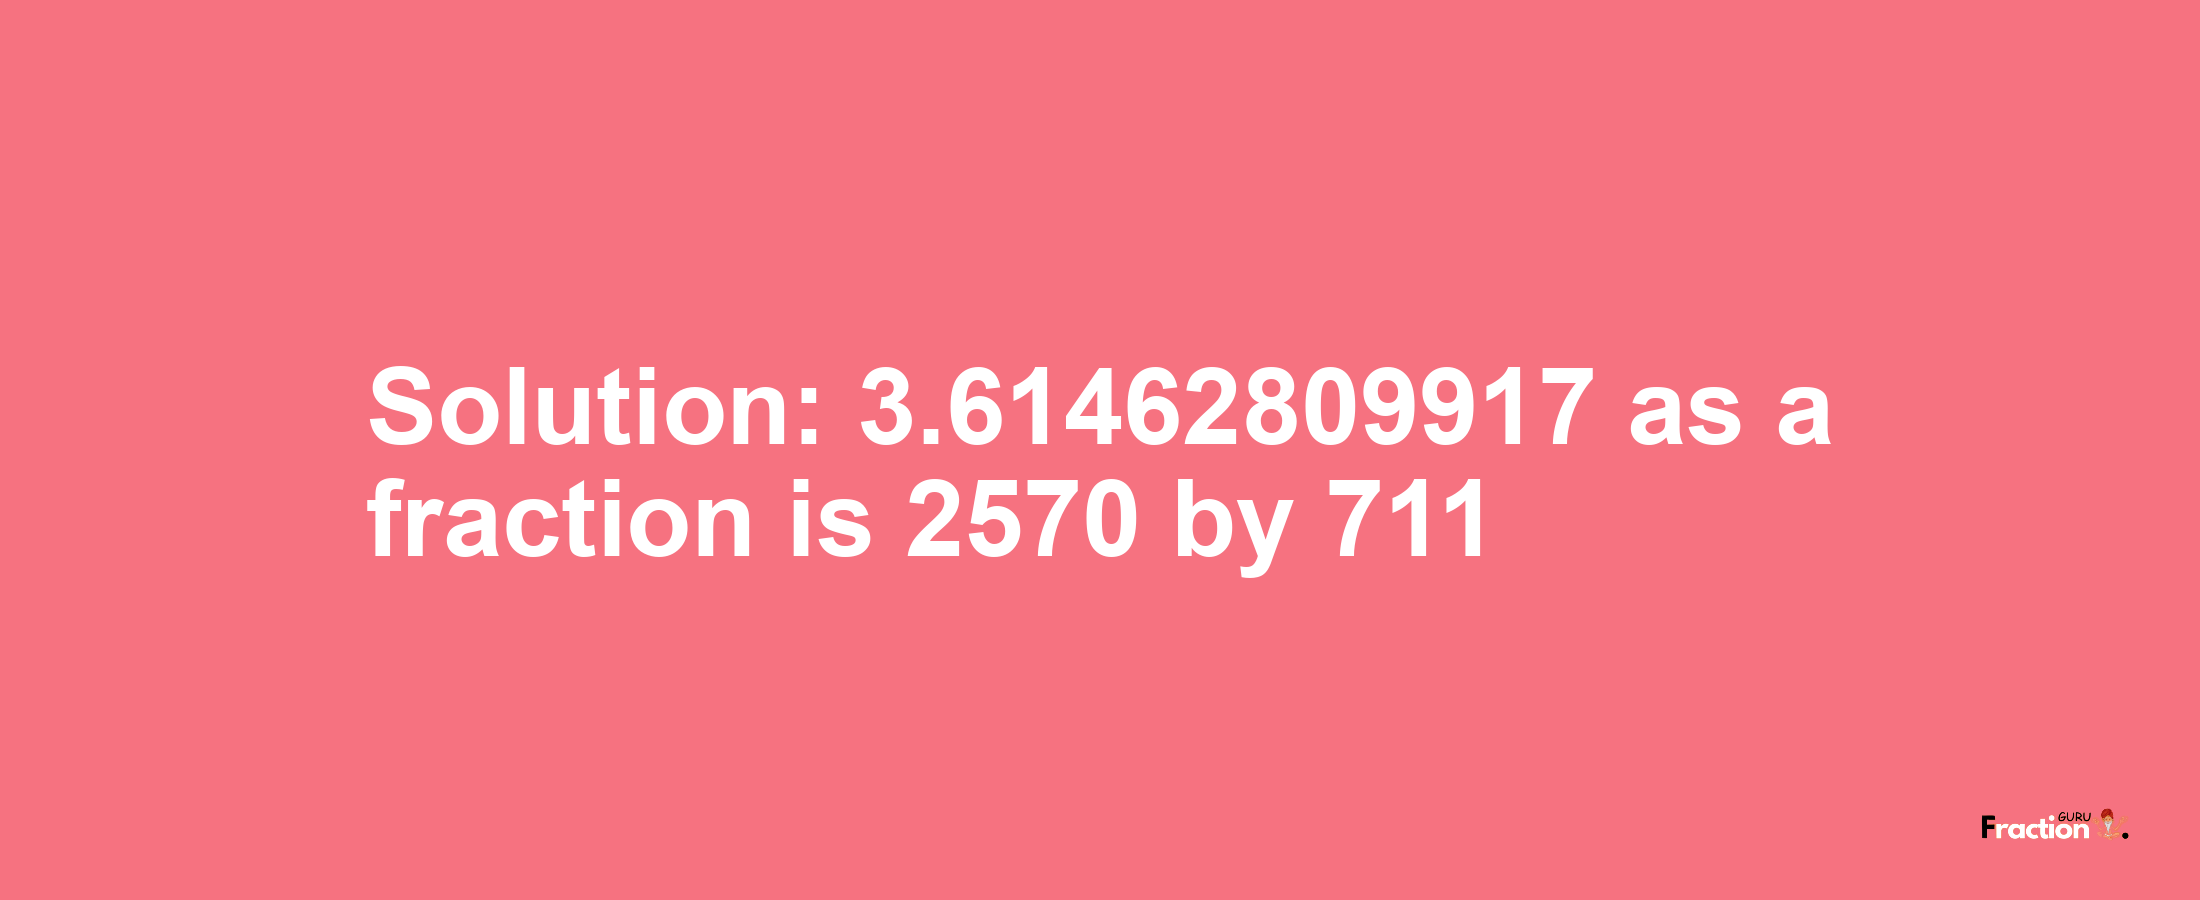 Solution:3.61462809917 as a fraction is 2570/711